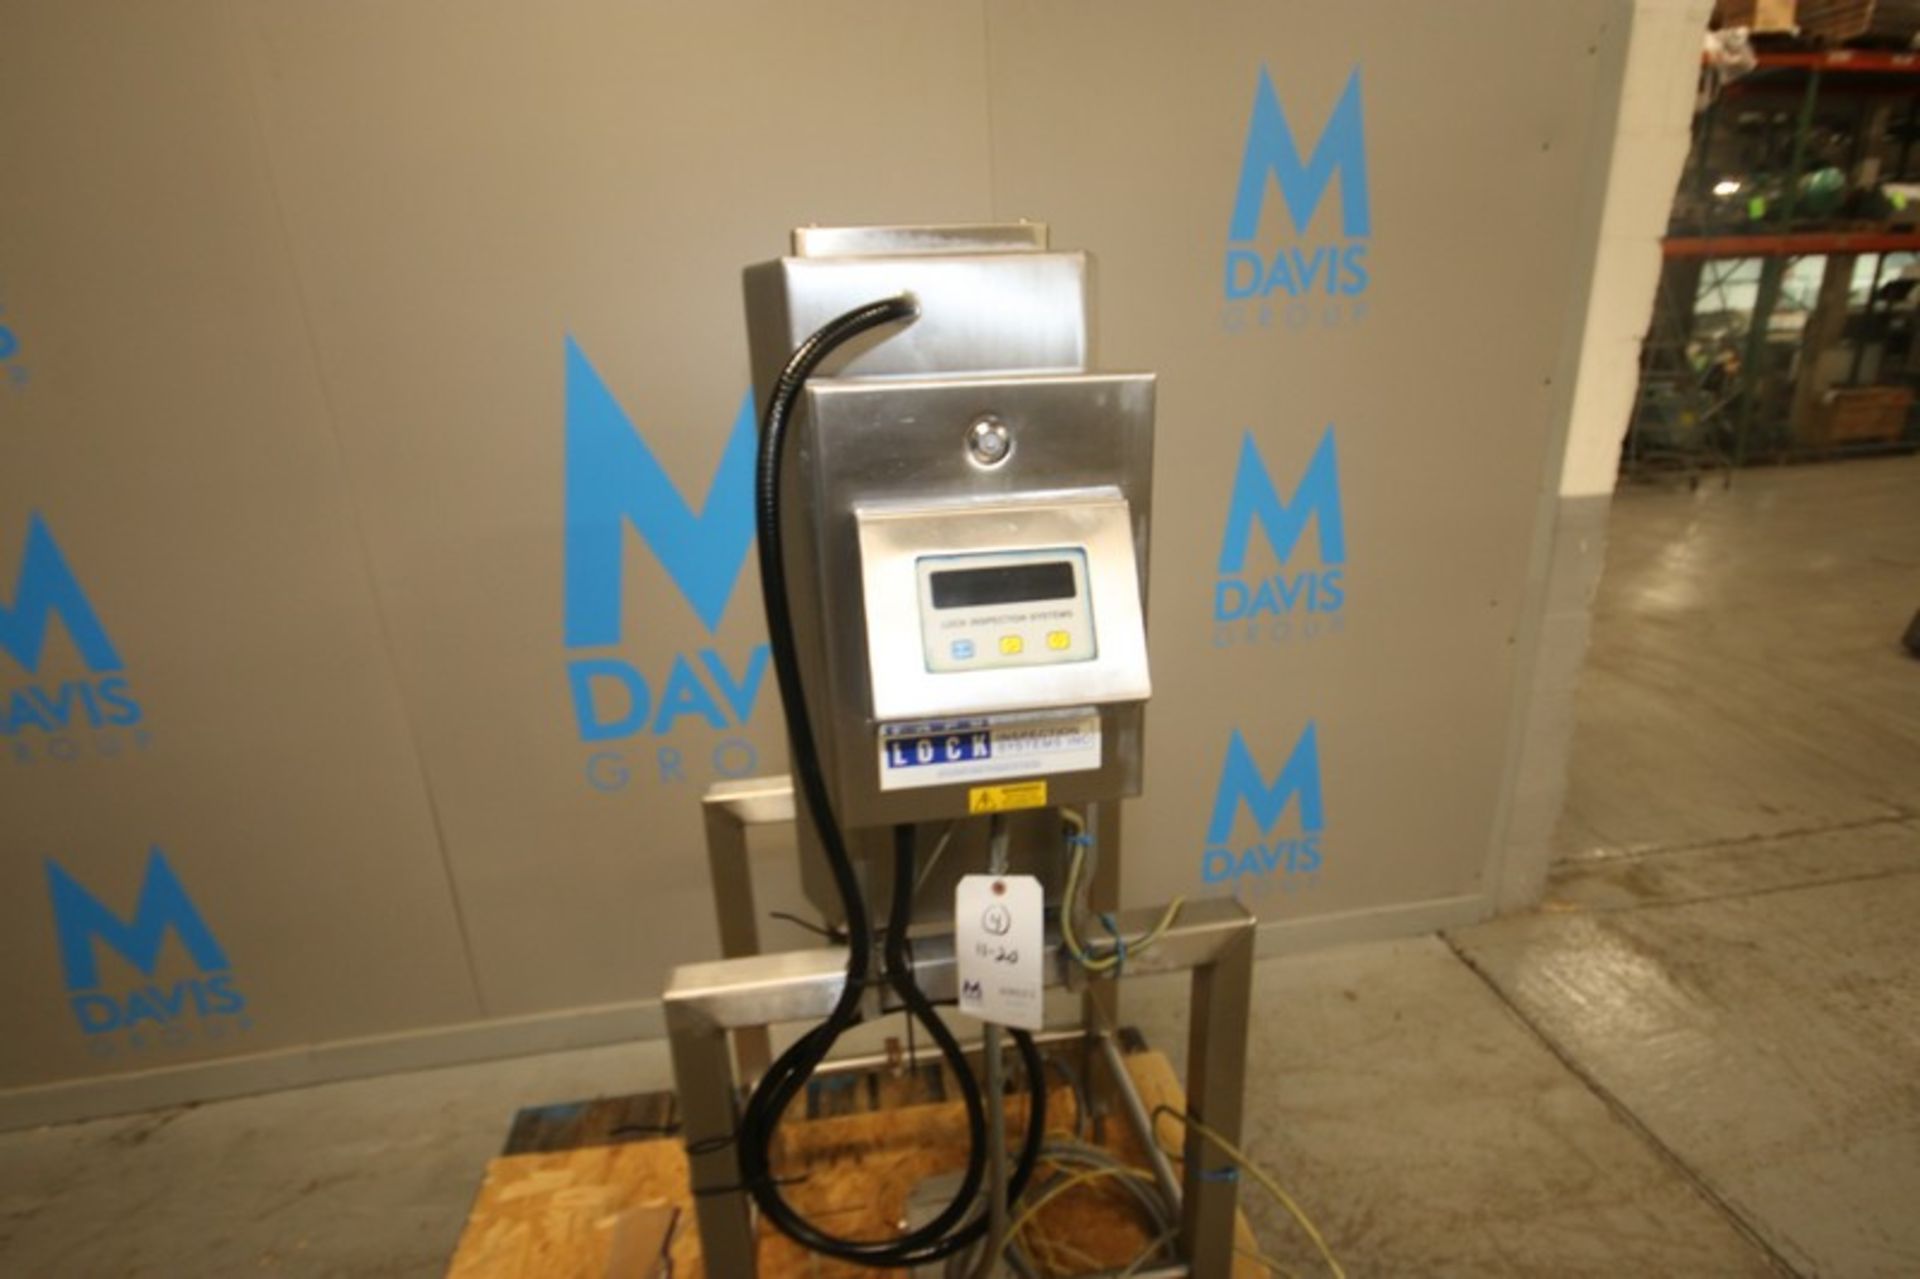 Lock S/S Metal Detector, with Aprox. 7" W x 10" H x 13" Deep Product Opening, Mounted on S/S - Image 7 of 7